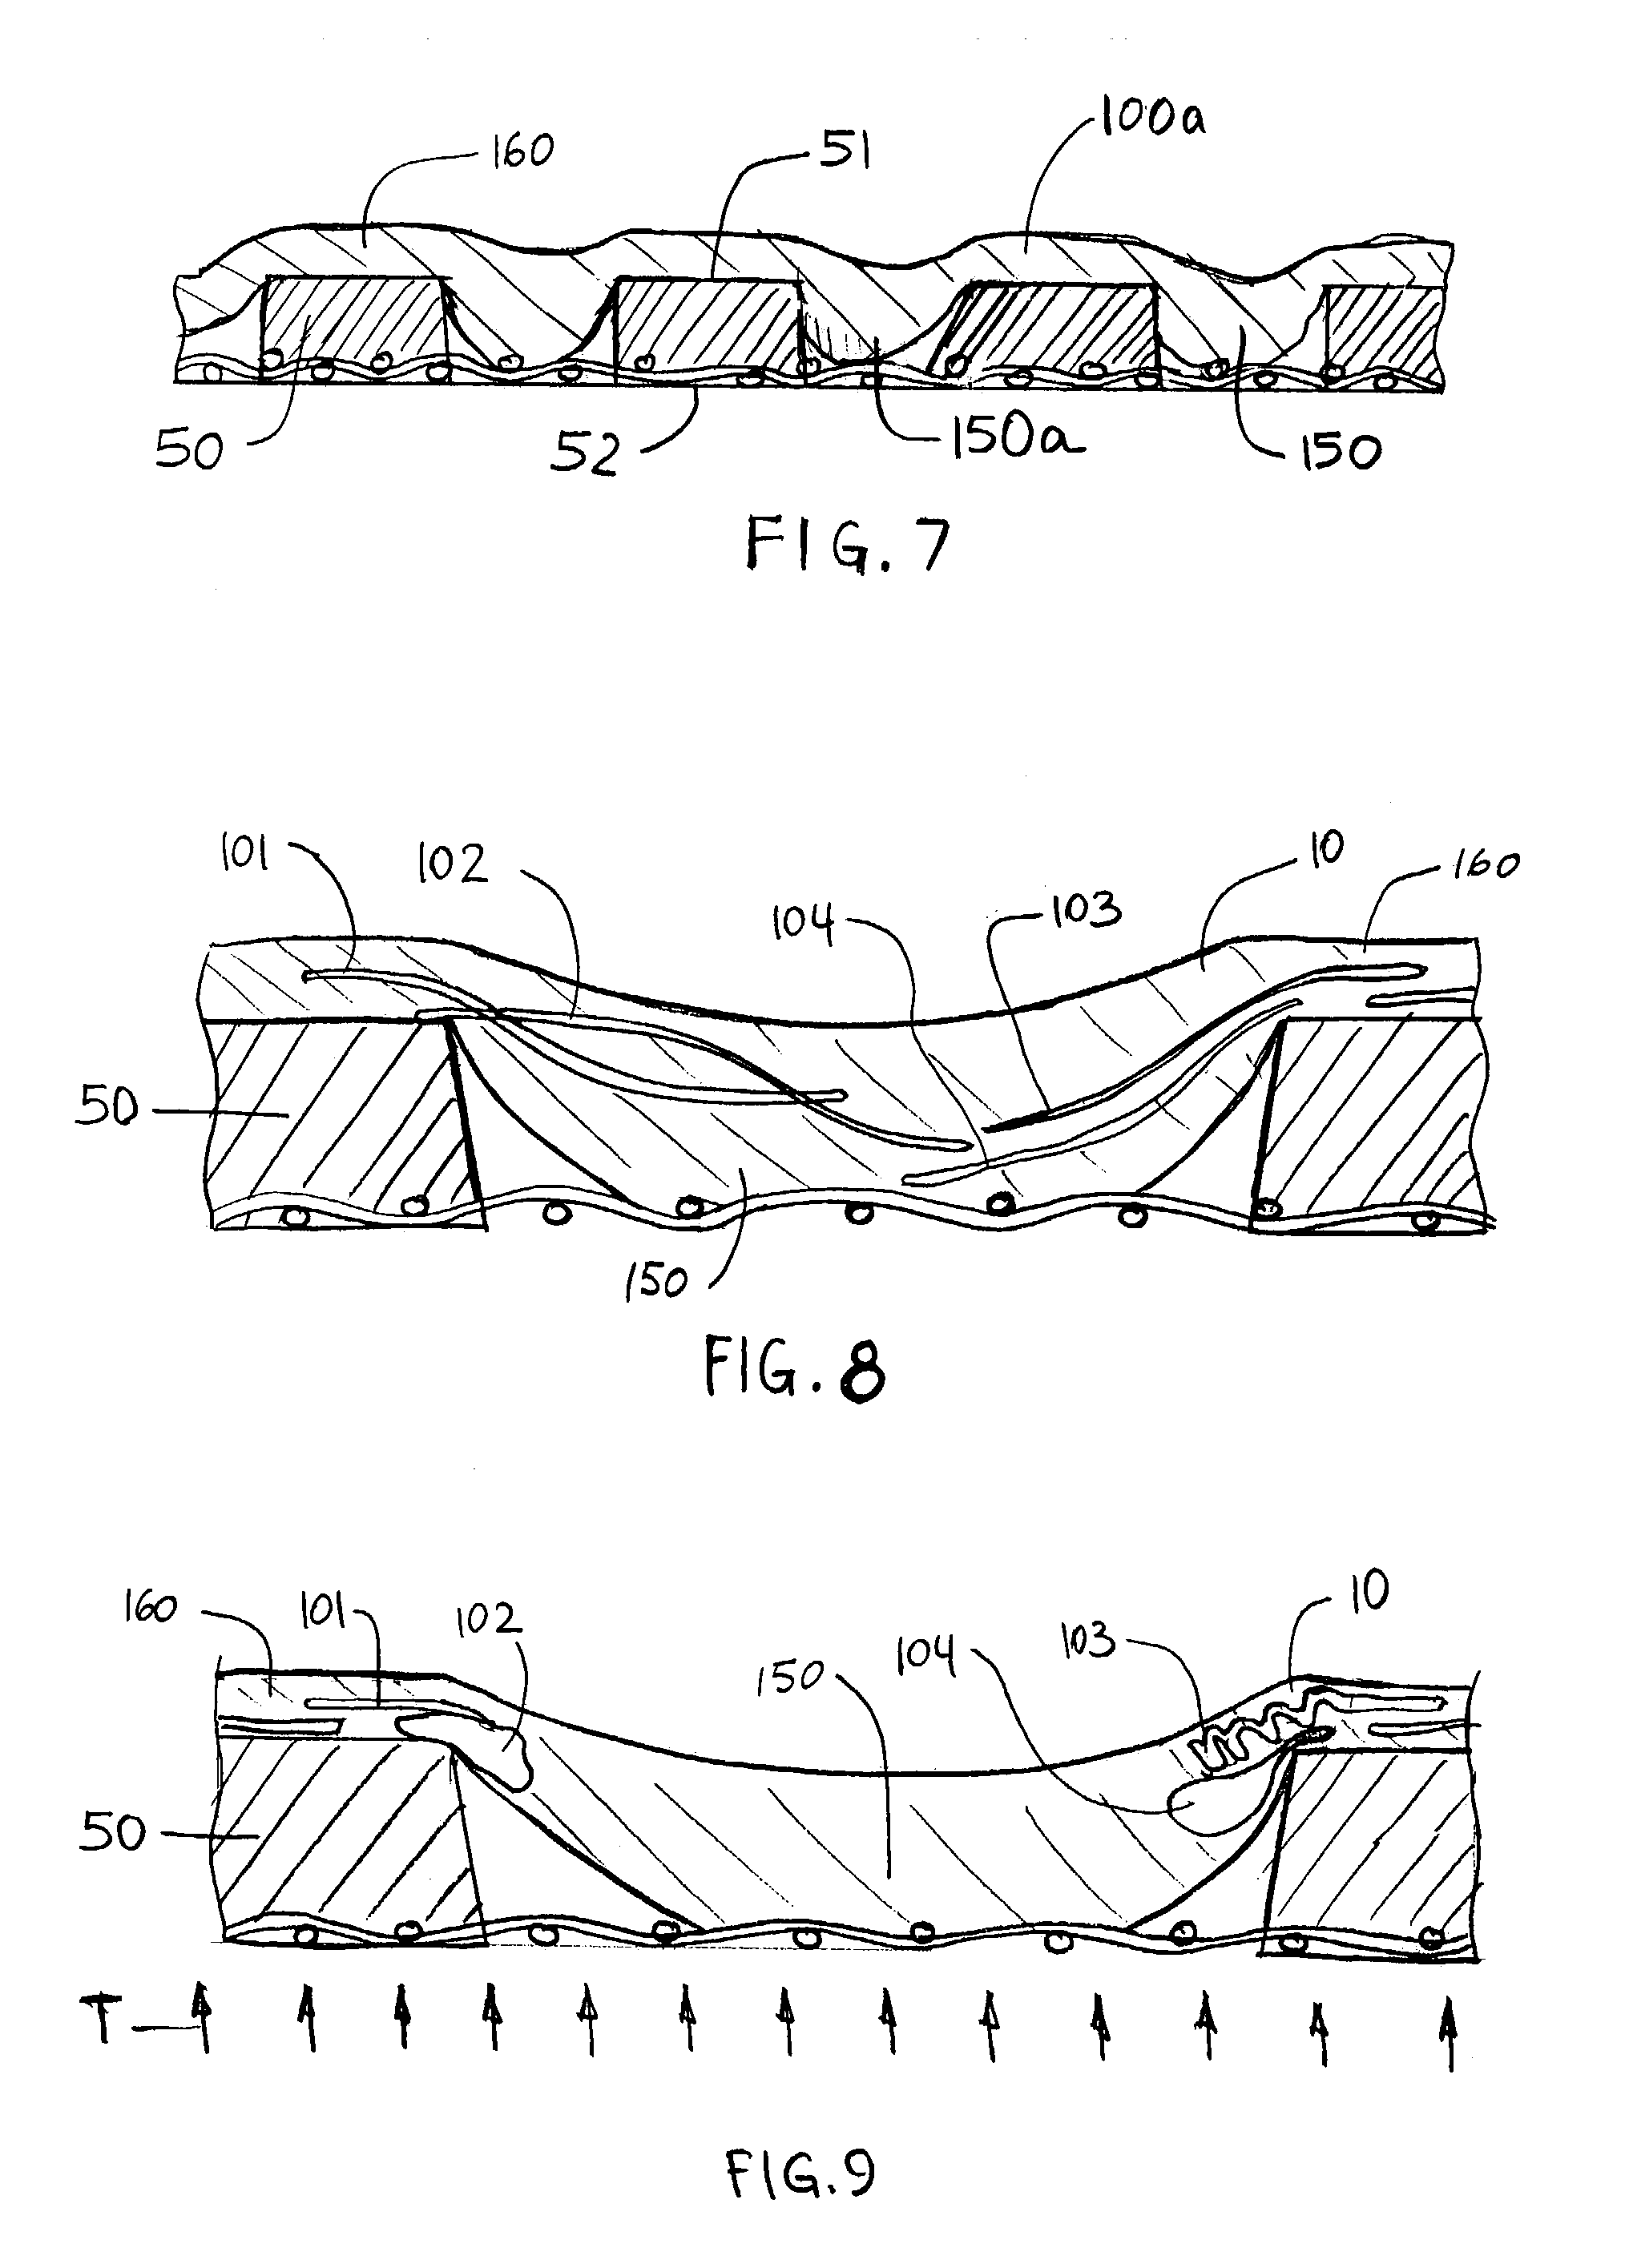 Process for making unitary fibrous structure comprising randomly distributed cellulosic fibers and non-randomly distributed synthetic fibers